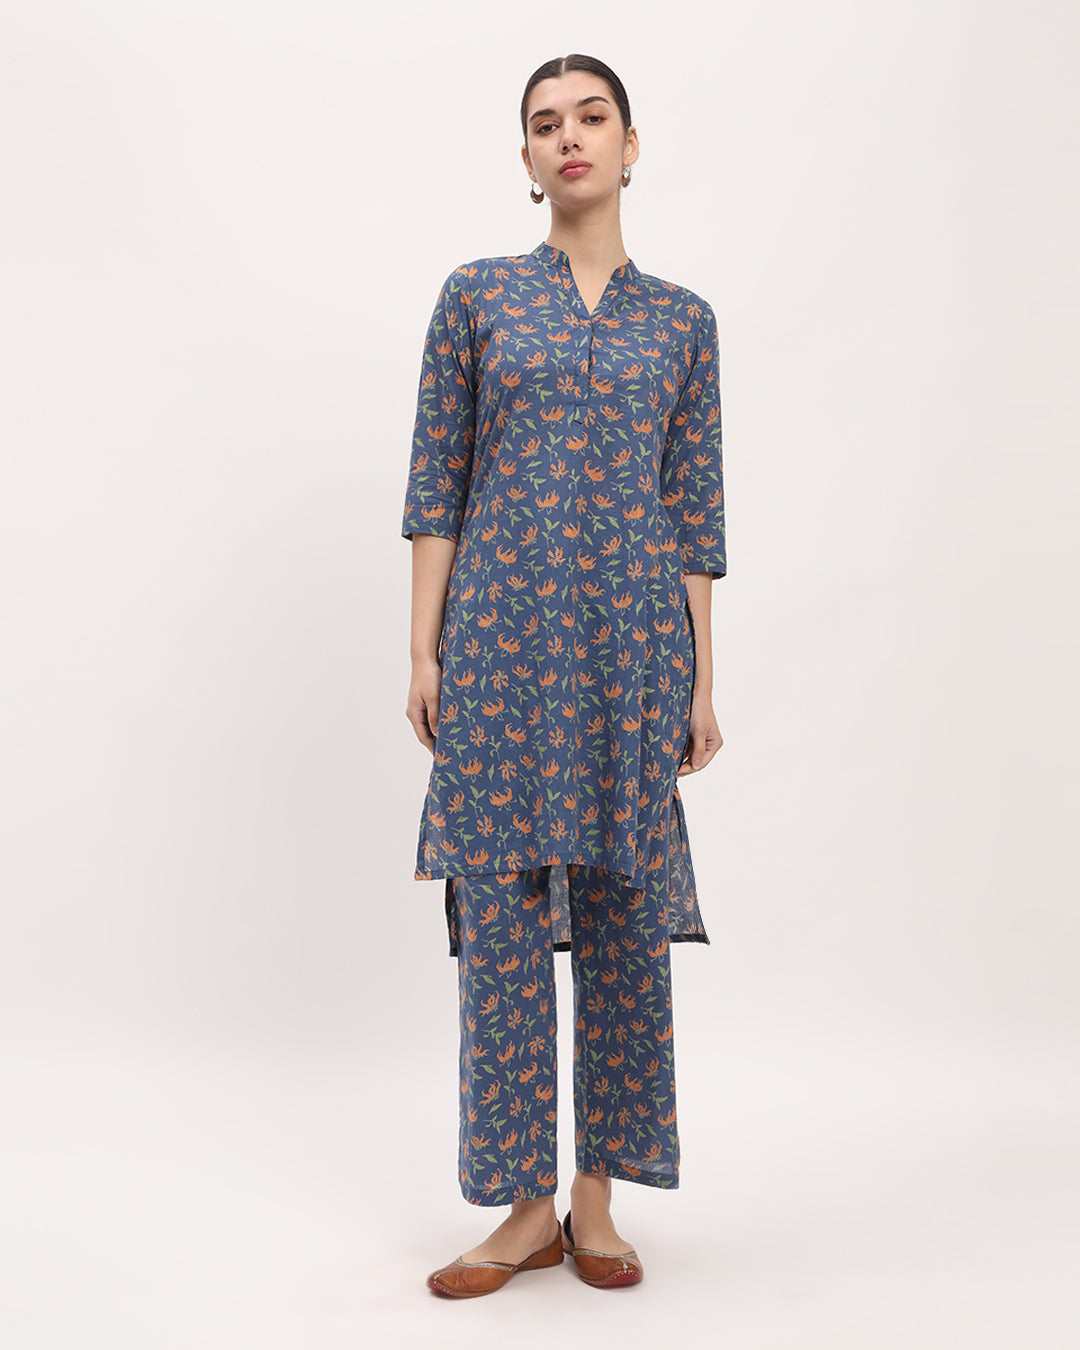 Combo: Golden Blossom & Fire Lillies High-Low Printed Kurta (Without Bottoms)